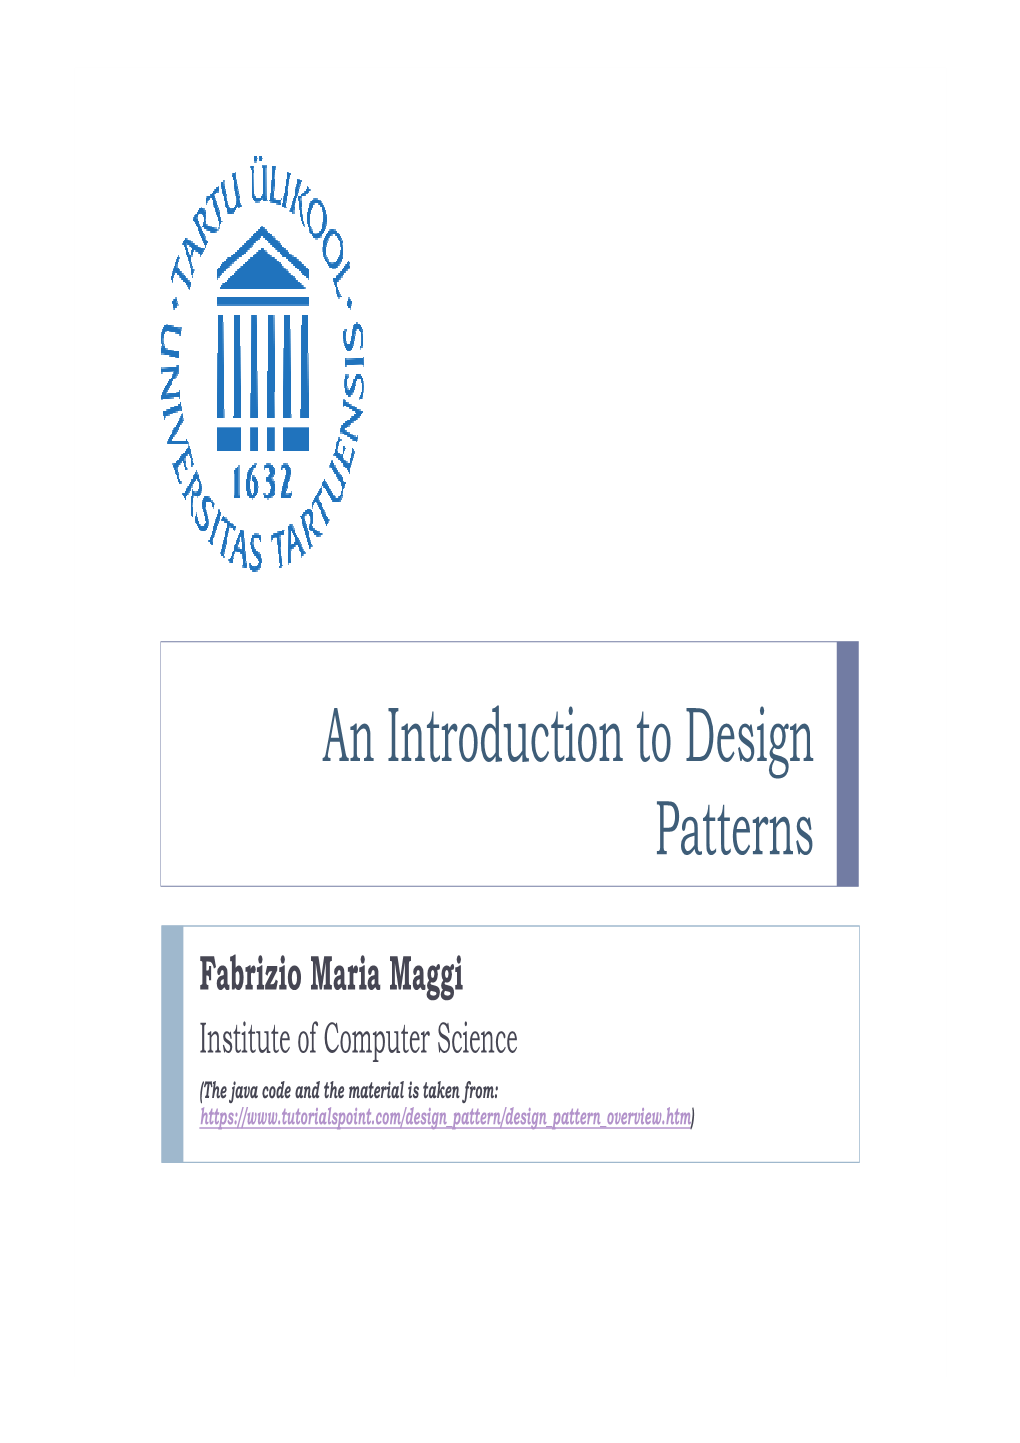 An Introduction to Design Patterns